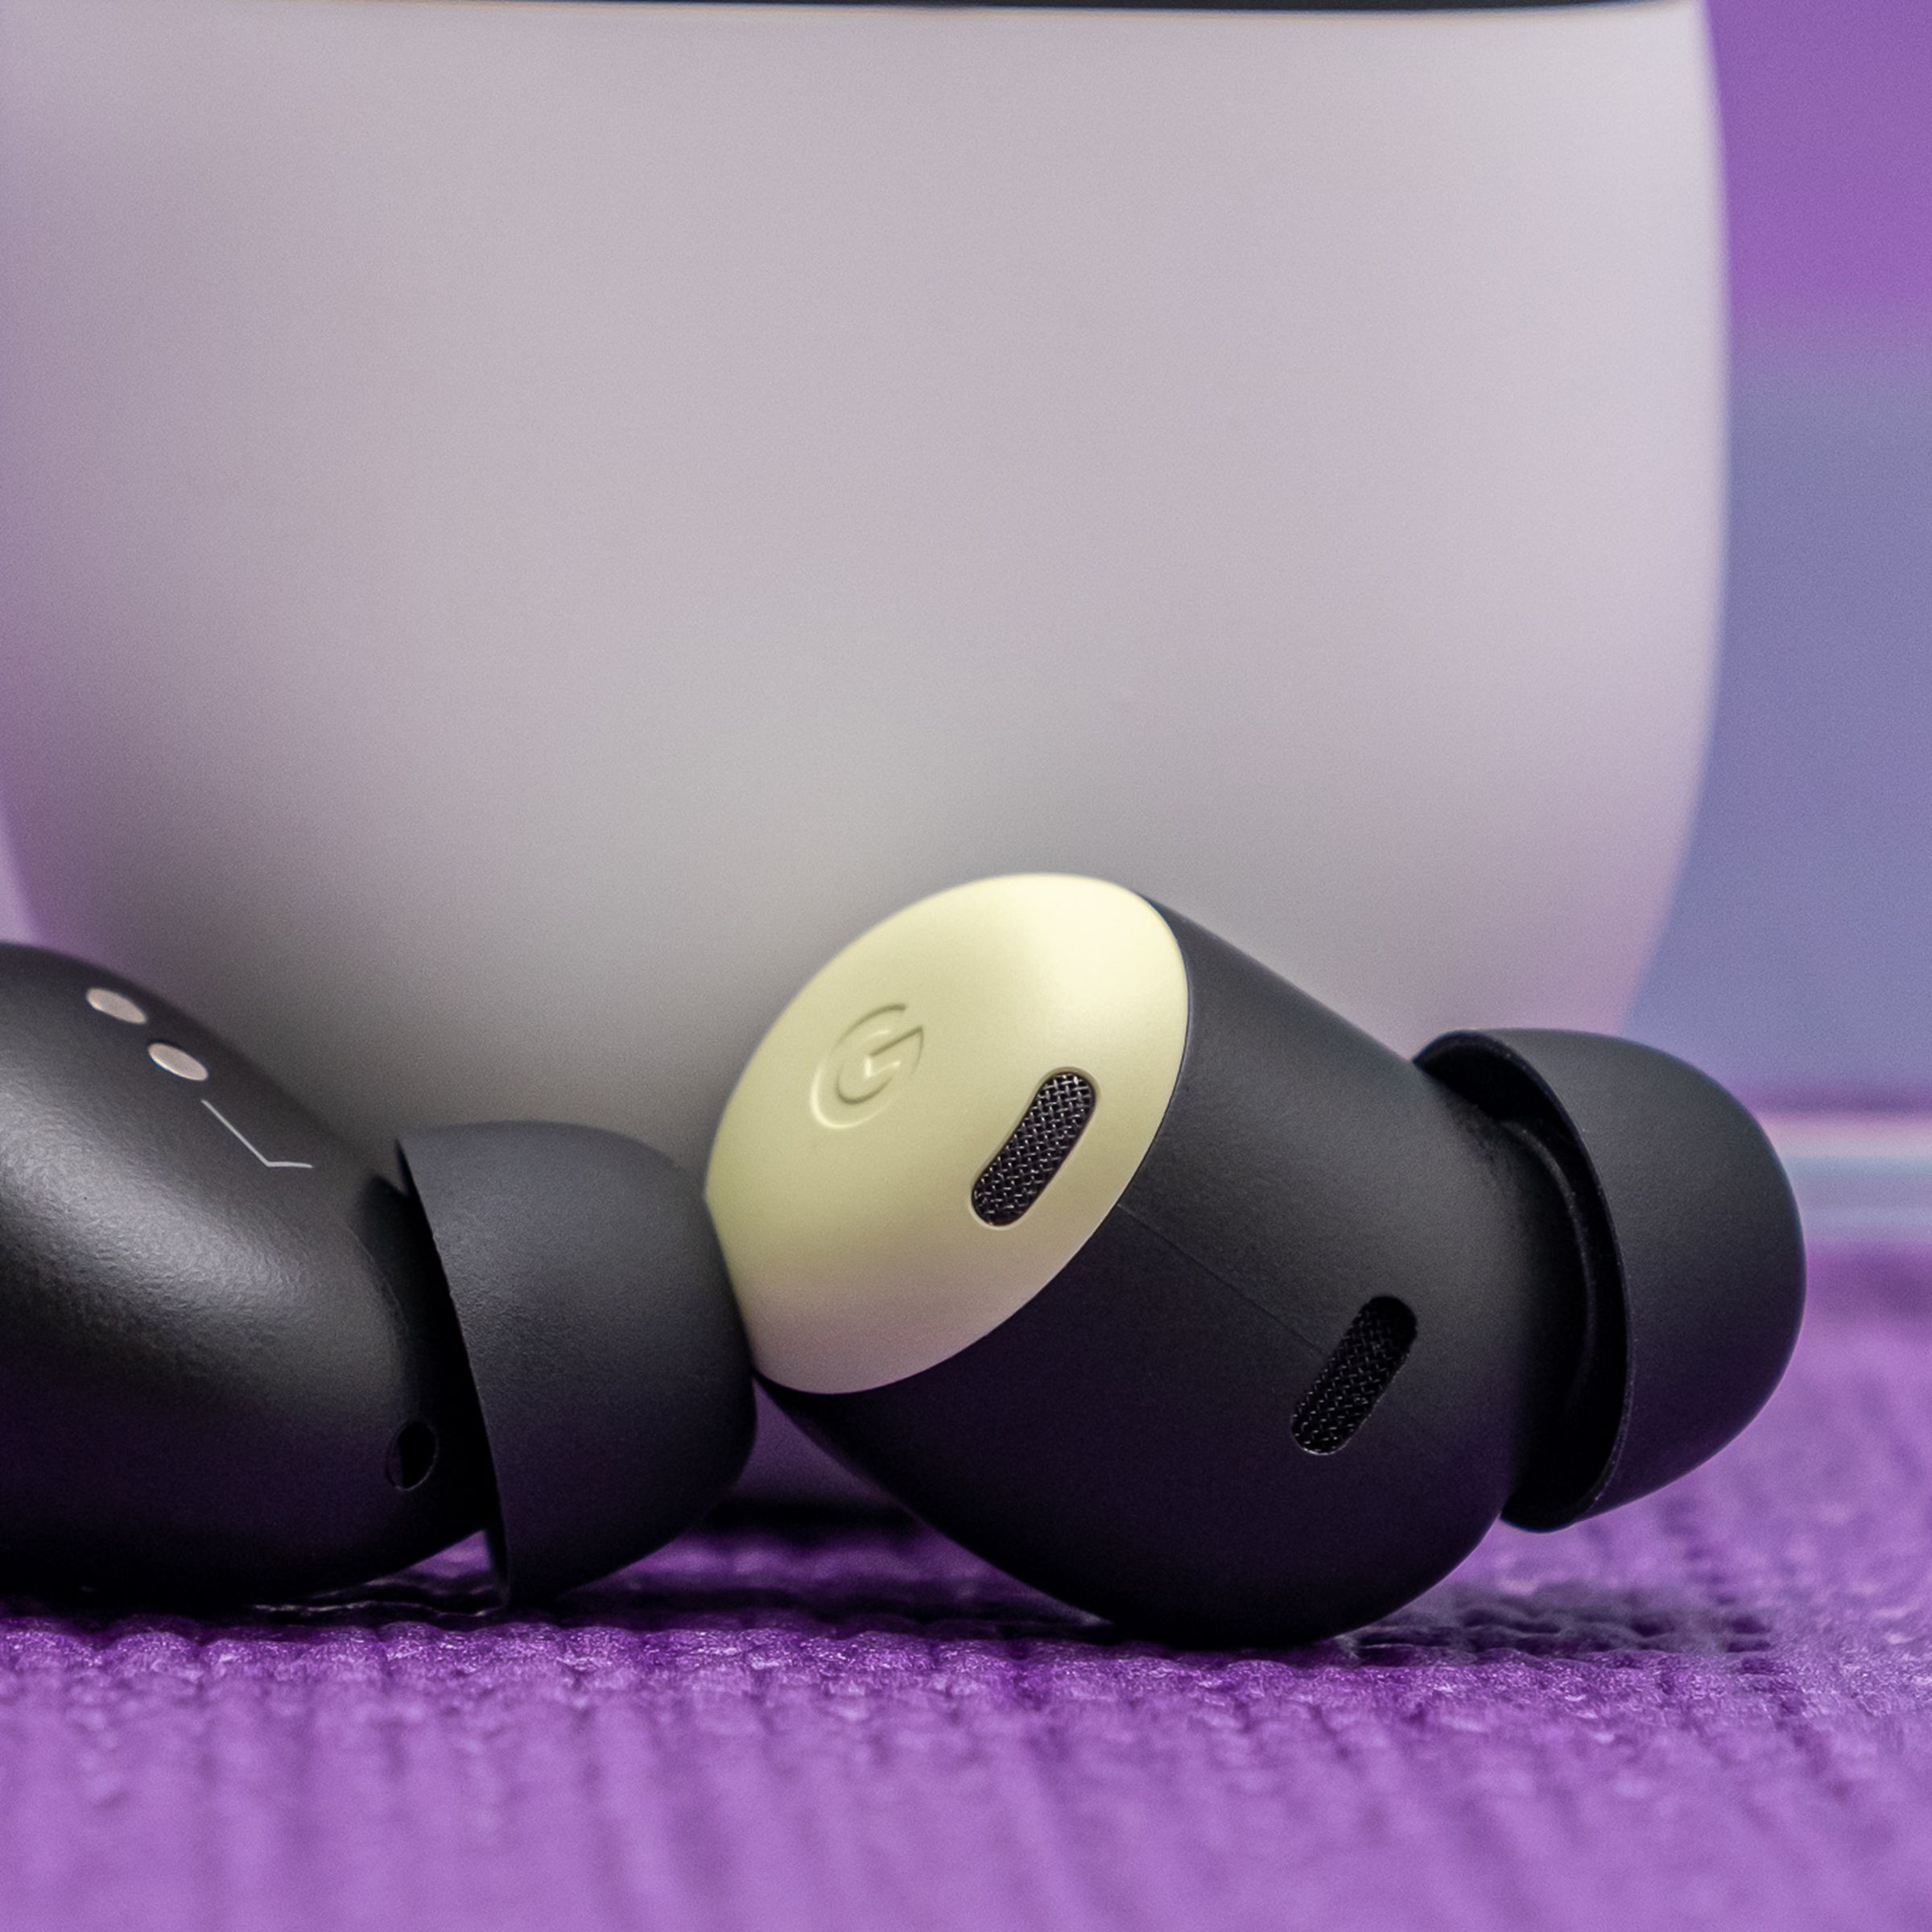 Google's Pixel Buds Pro earbuds, in yellow lemongrass color, resting at the foot of their white charging case on a tabletop.